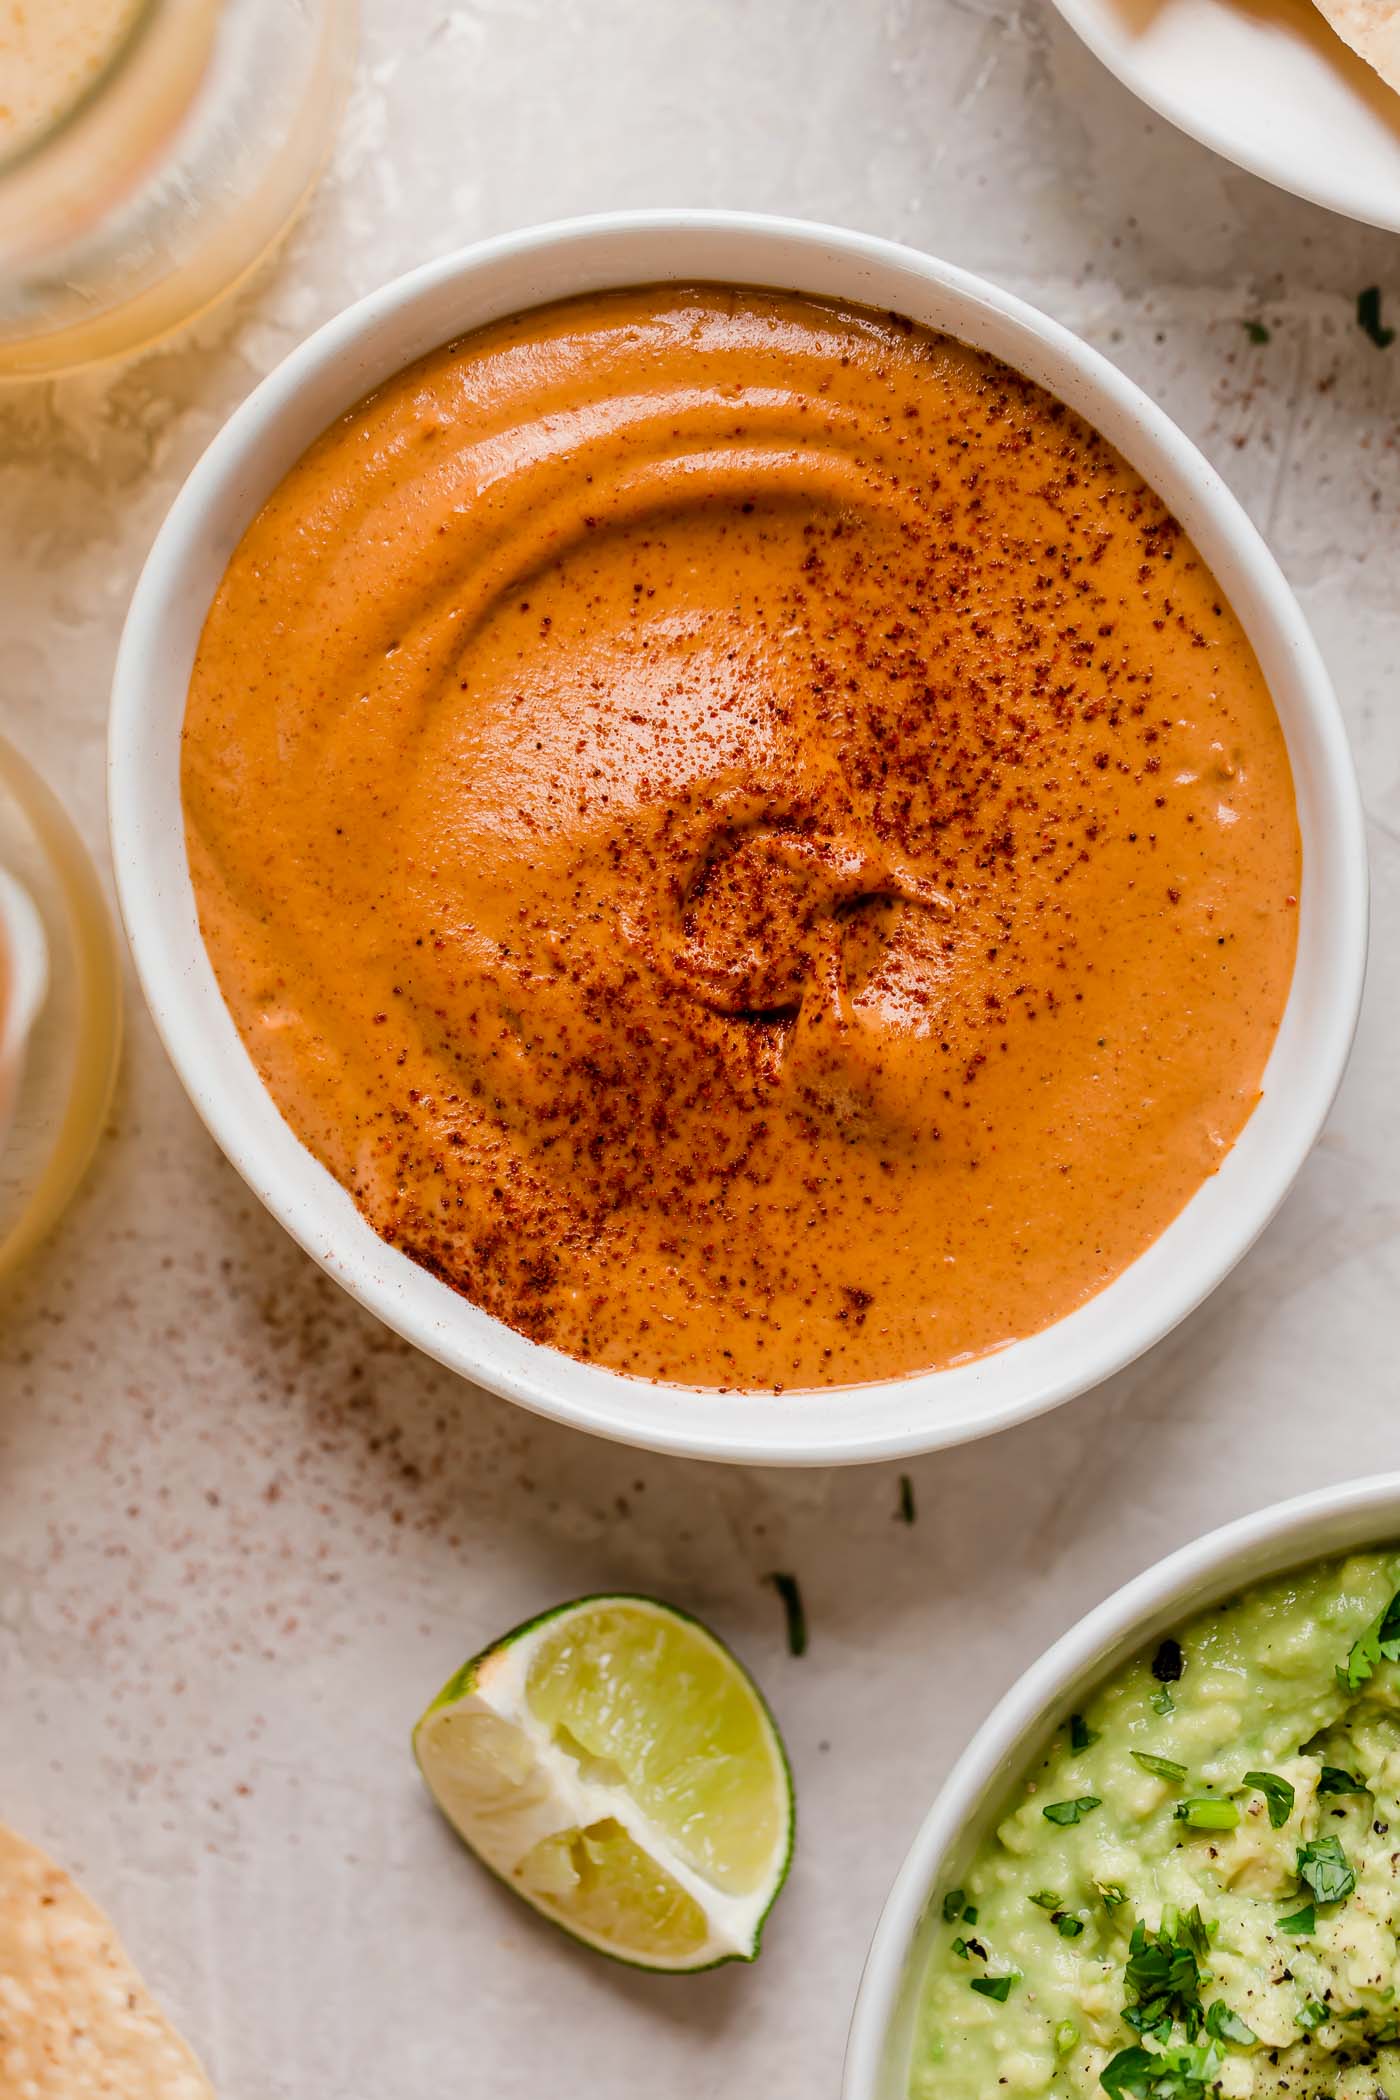 smoky chipotle cashew queso! an easy vegan queso recipe made with cashews, chipotle peppers, spices, & lime juice! the perfect healthy game day snack, smoky chipotle cashew queso will be the hit of your next game day party! #playswellwithbutter #cashewqueso #veganqueso #easyveganrecipes #vegansnack #gamedaysnacks #gamedayappetizer #gamedayfood #healthysnack